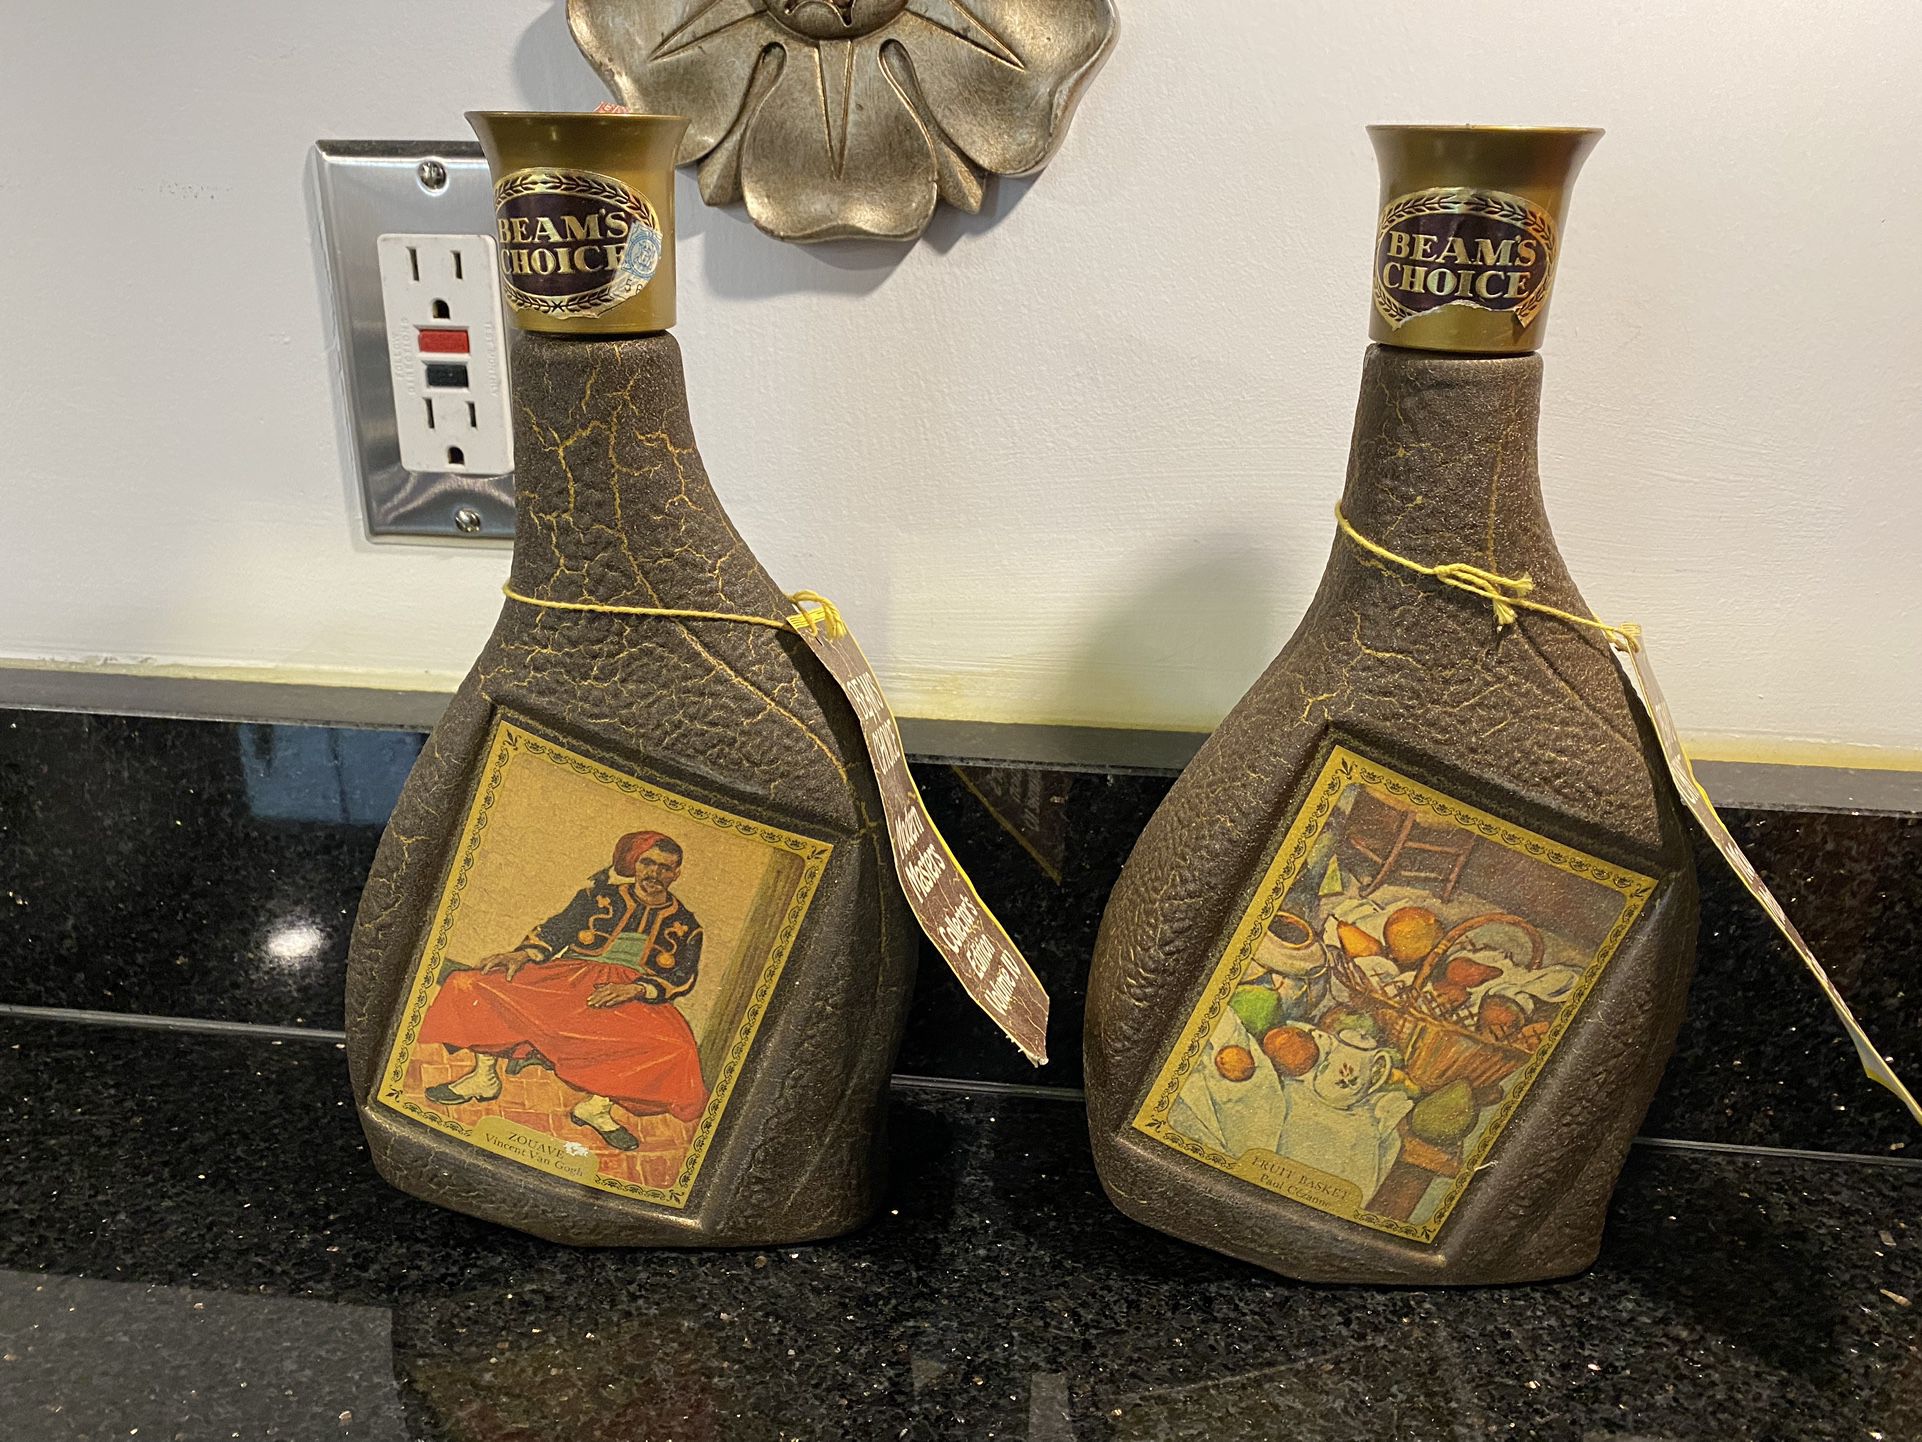 2 Collectible Leather Like Artistic Jim Beam Bottles for Bar Decor